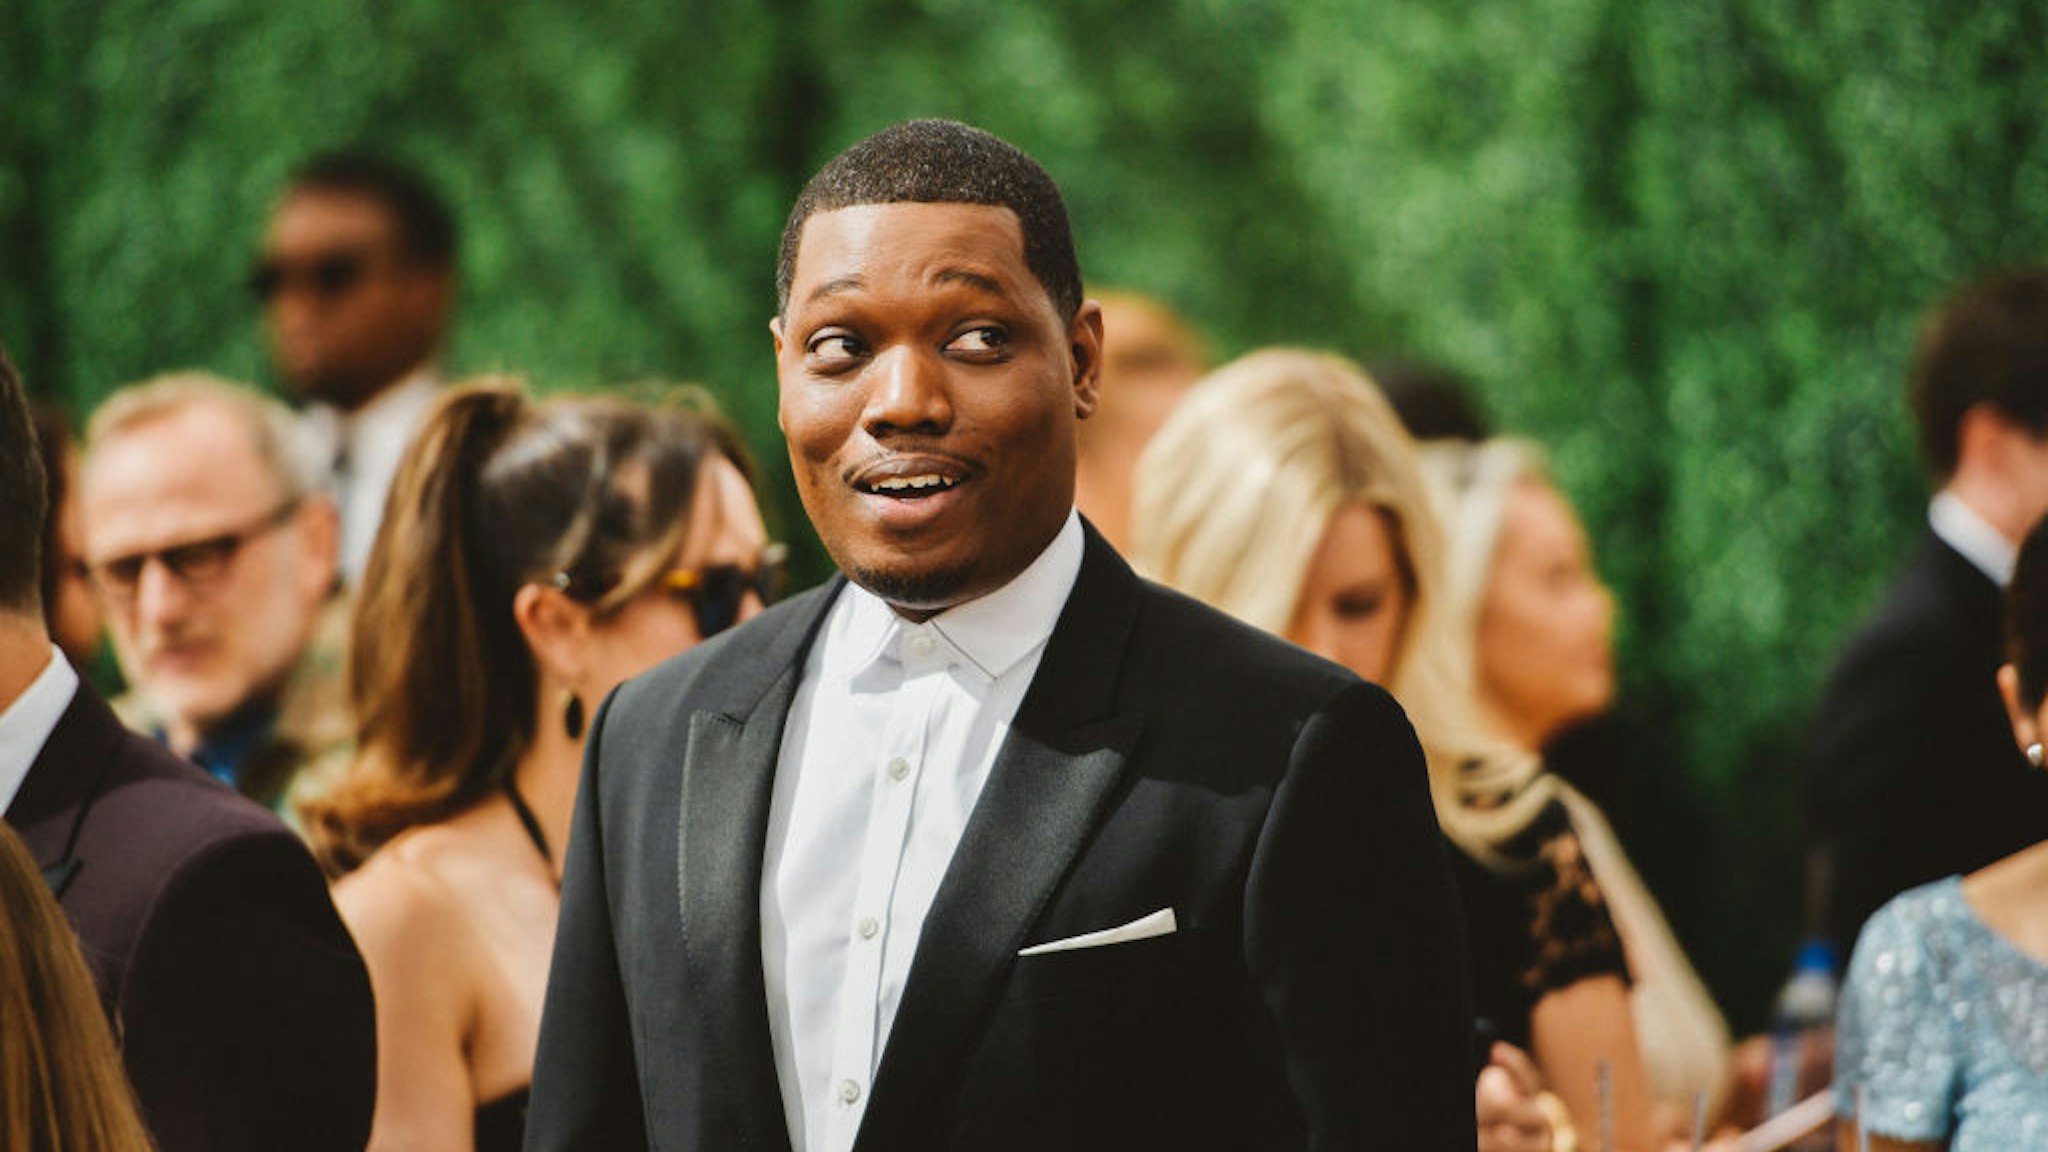 LOS ANGELES, CA - SEPTEMBER 17: (EDITORS NOTE: Image has been digitally enhanced) Michael Che arrives at the 70th Emmy Awards on September 17, 2018 in Los Angeles, California. (Photo by Matt Winkelmeyer/Getty Images)